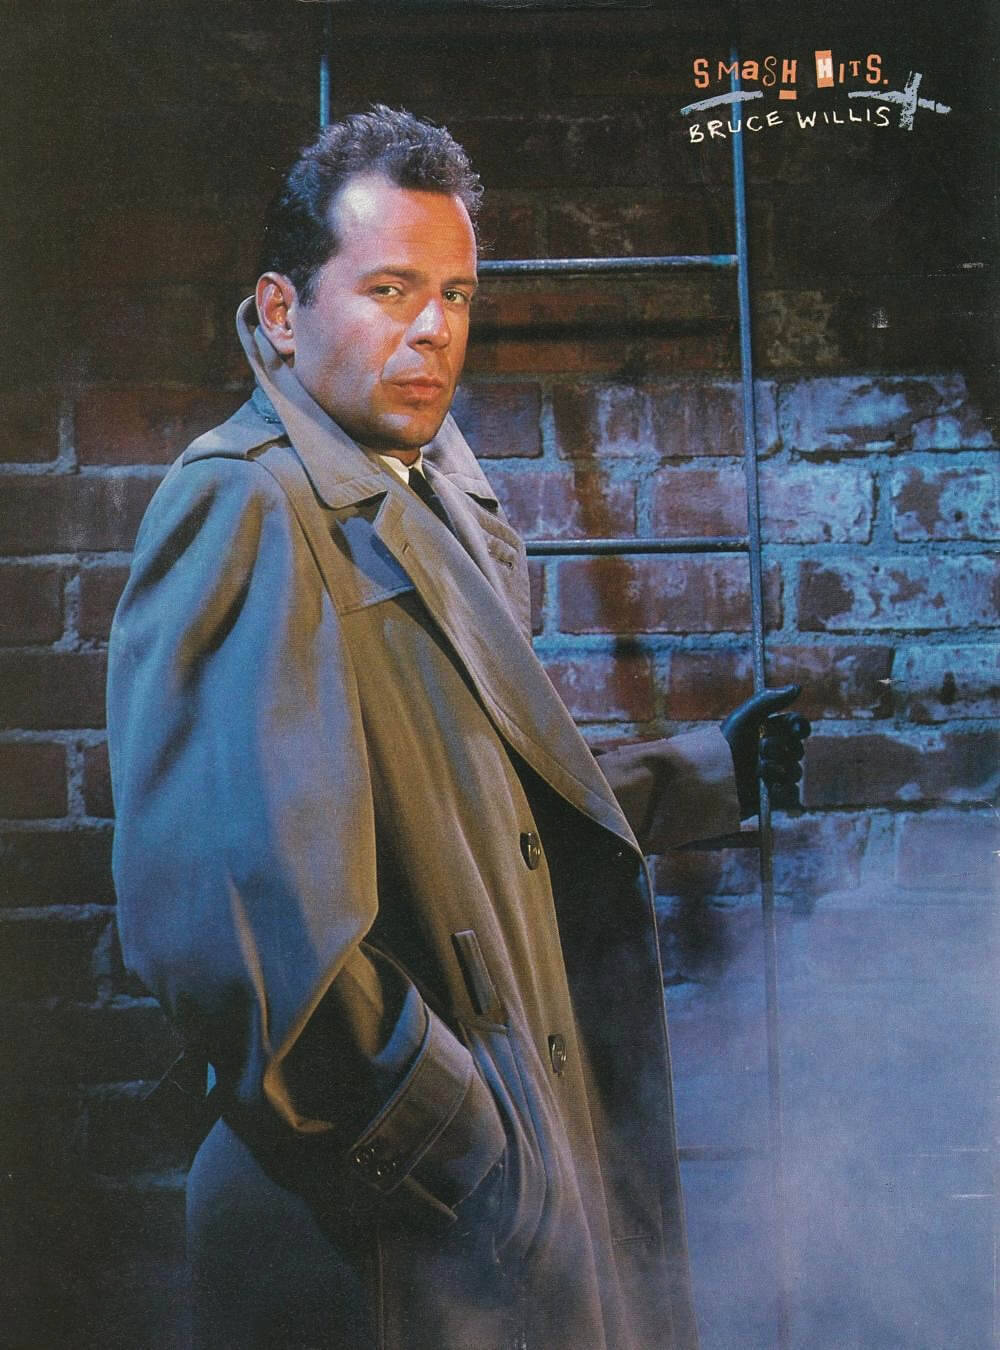 <p>Bruce Willis poster from Smash Hits magazine October 1987</p>